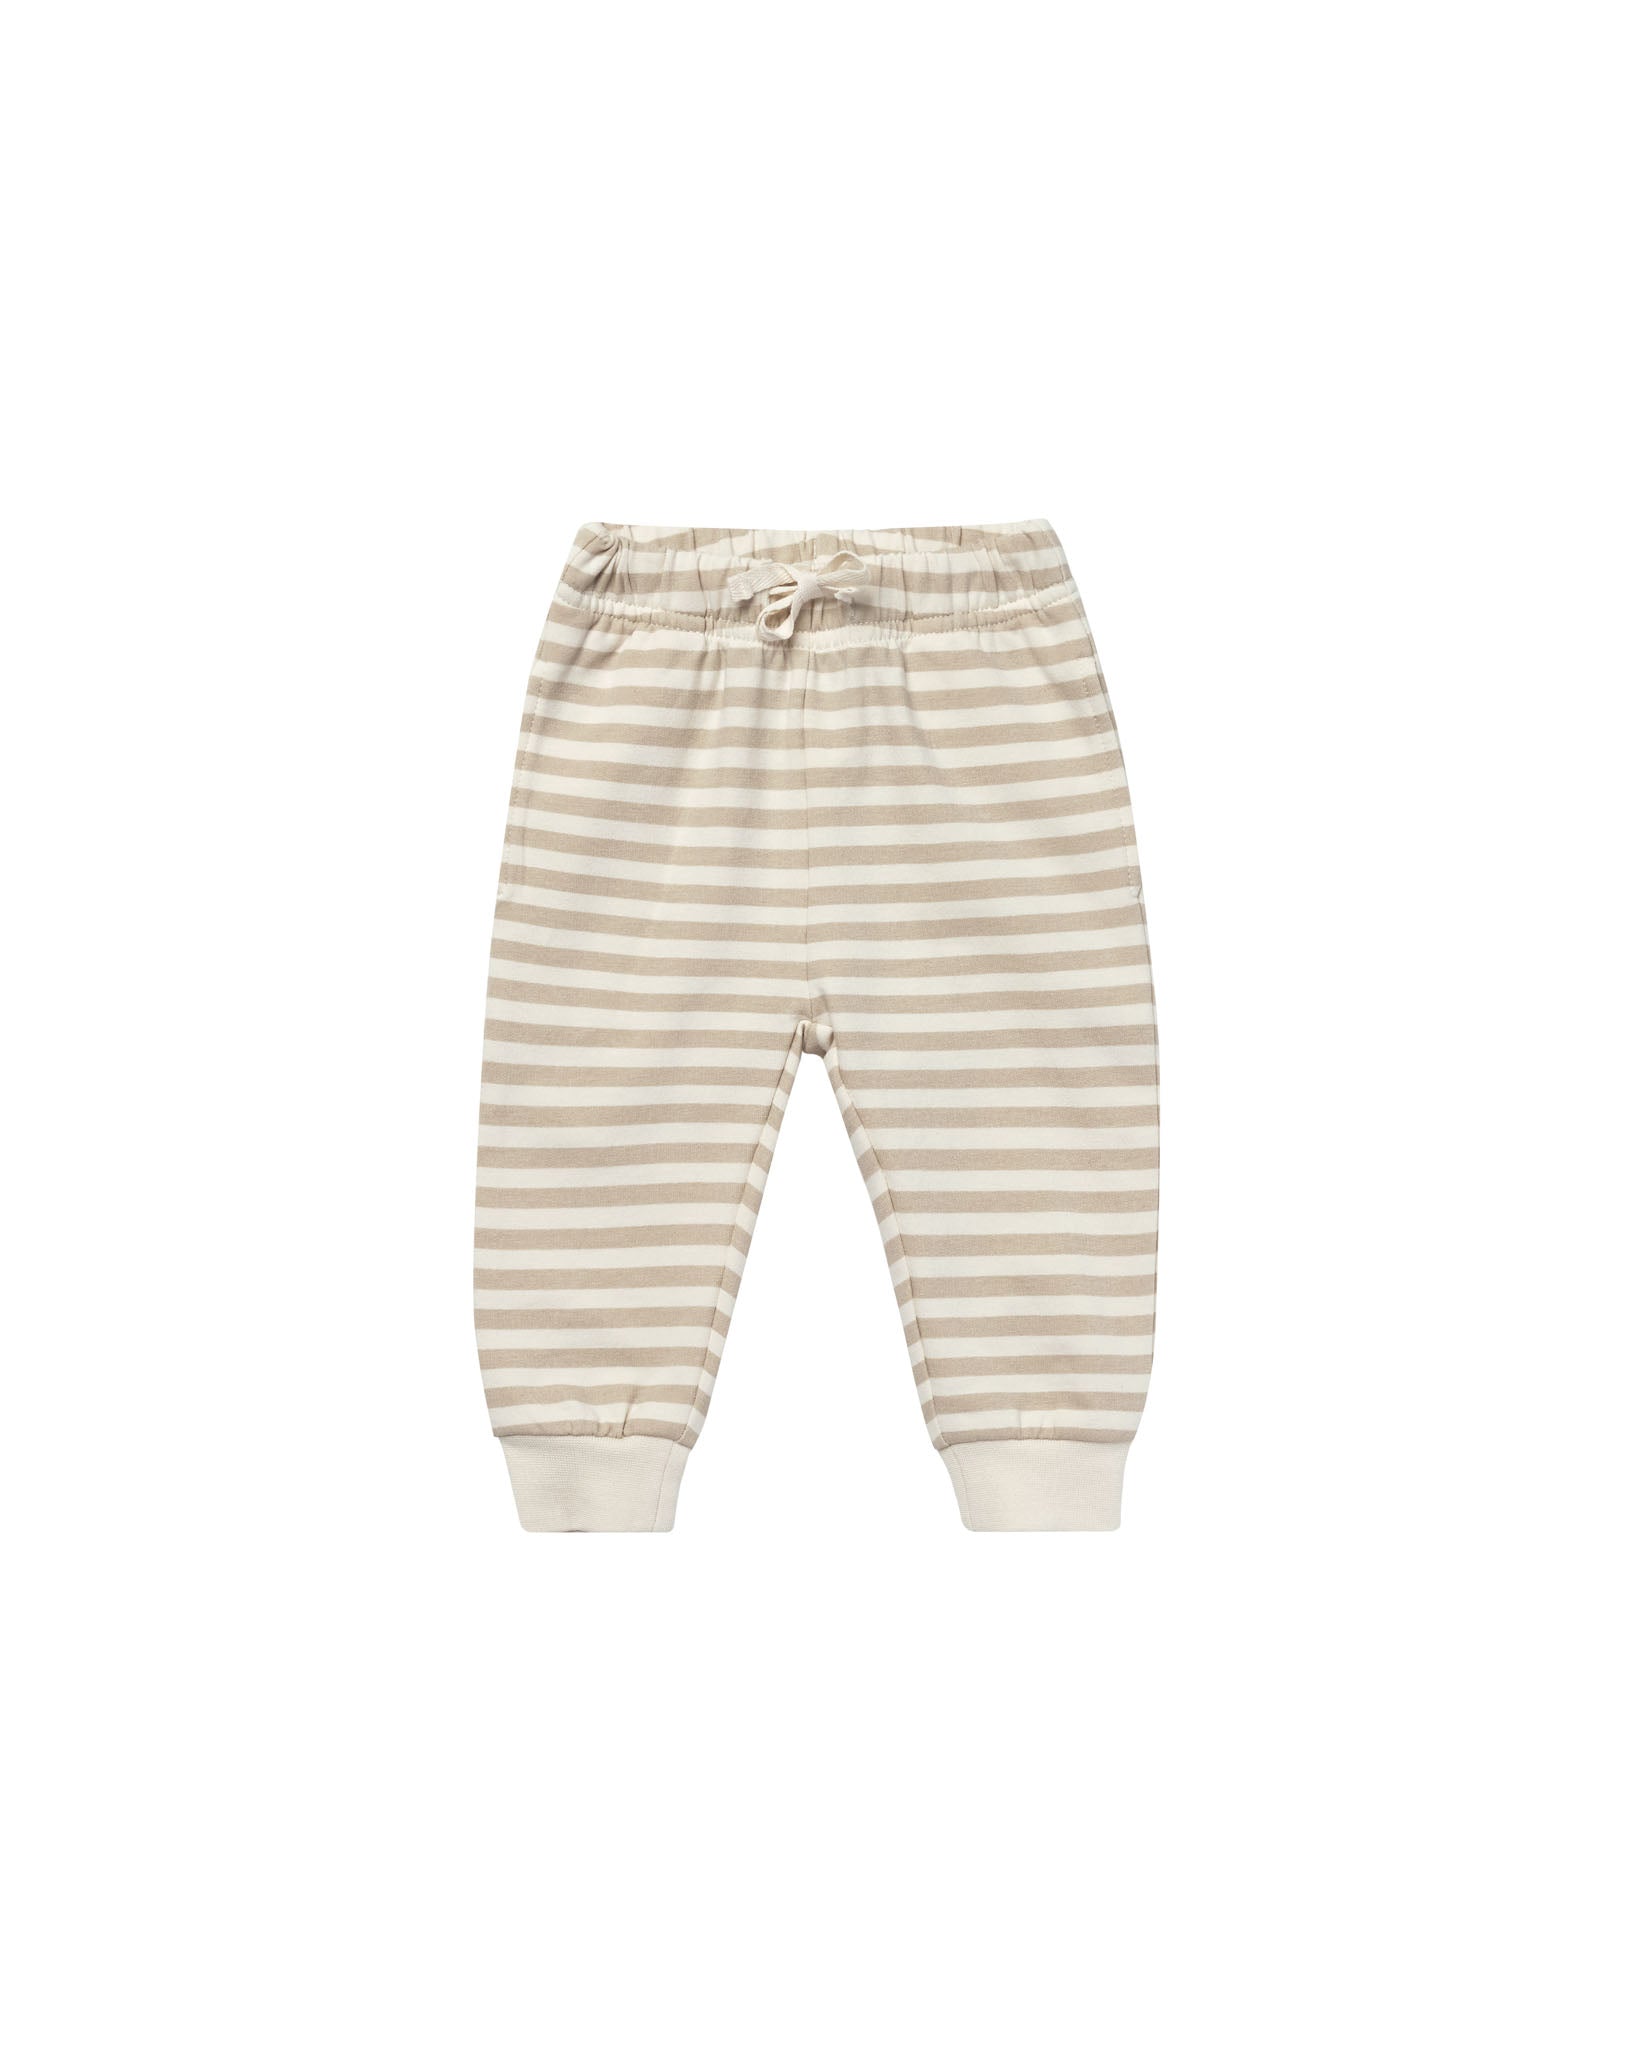 Relaxed Sweatpant - Sandstripe